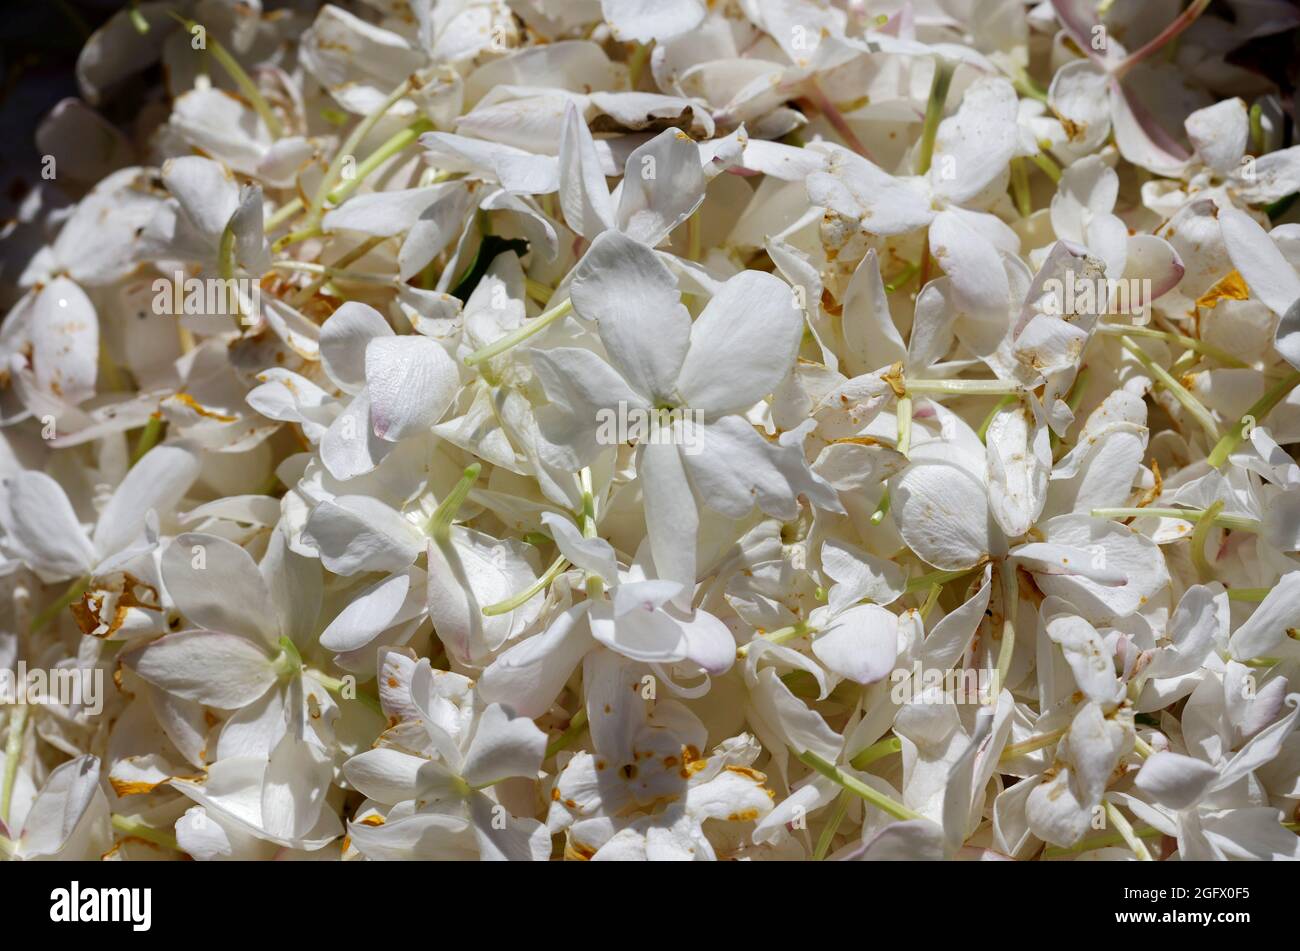 Jasmine flowers to be used to make Chanel No. 5 perfume are seen during  harvest at the Mul family fields in Pegomas near Grasse, in southern  France, August 26, 2021. Picture taken